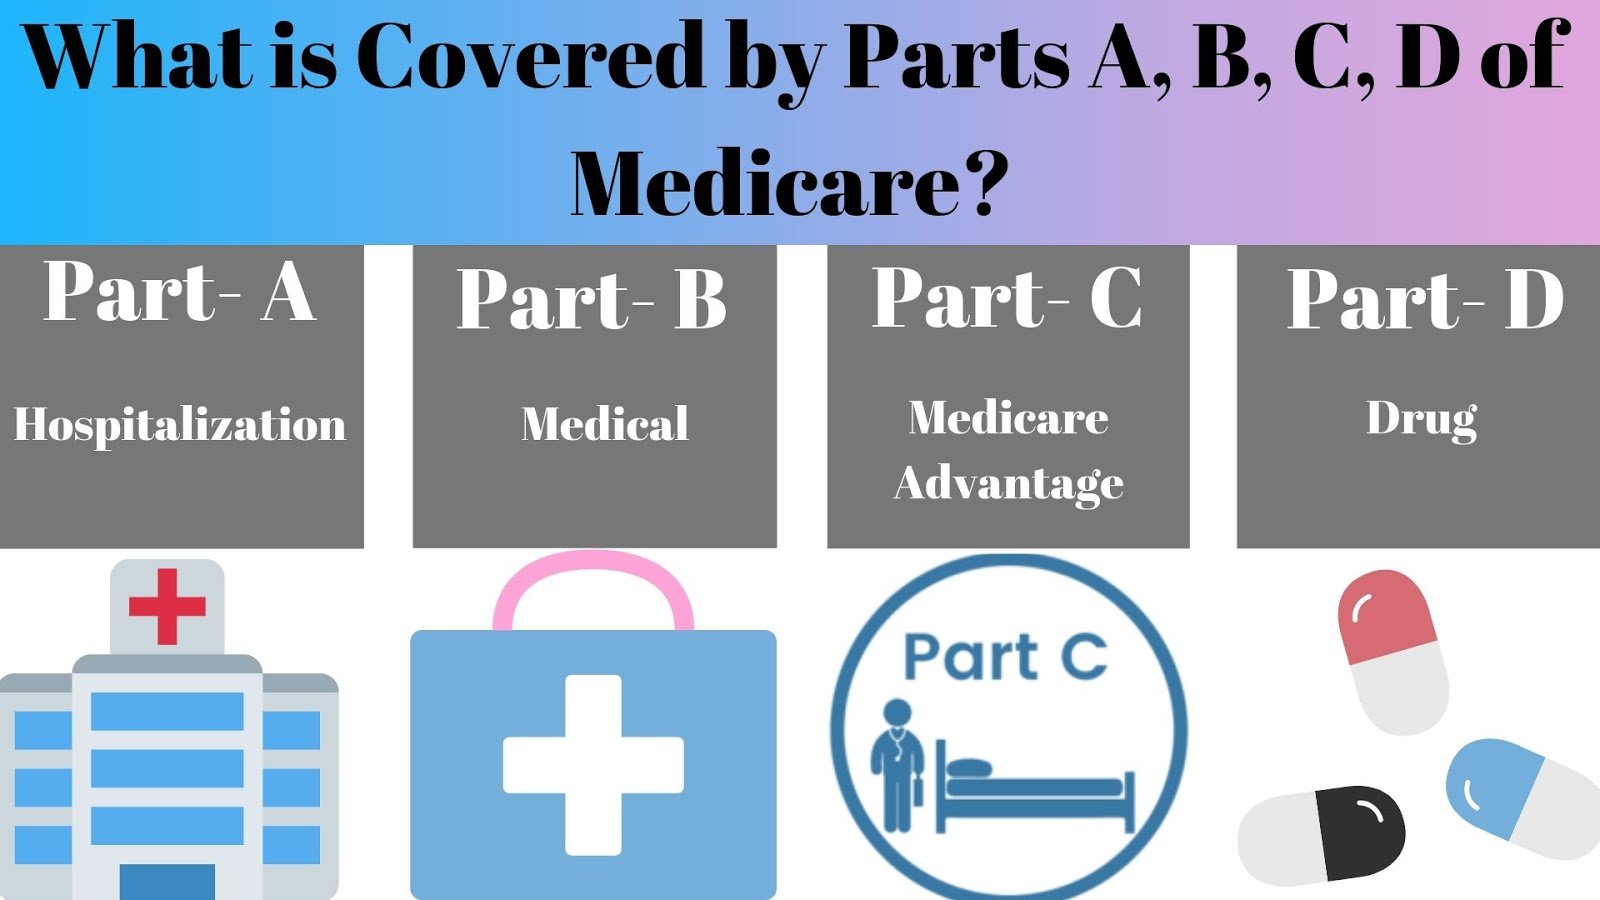 What is Covered by Parts A, B, C, D of Medicare?